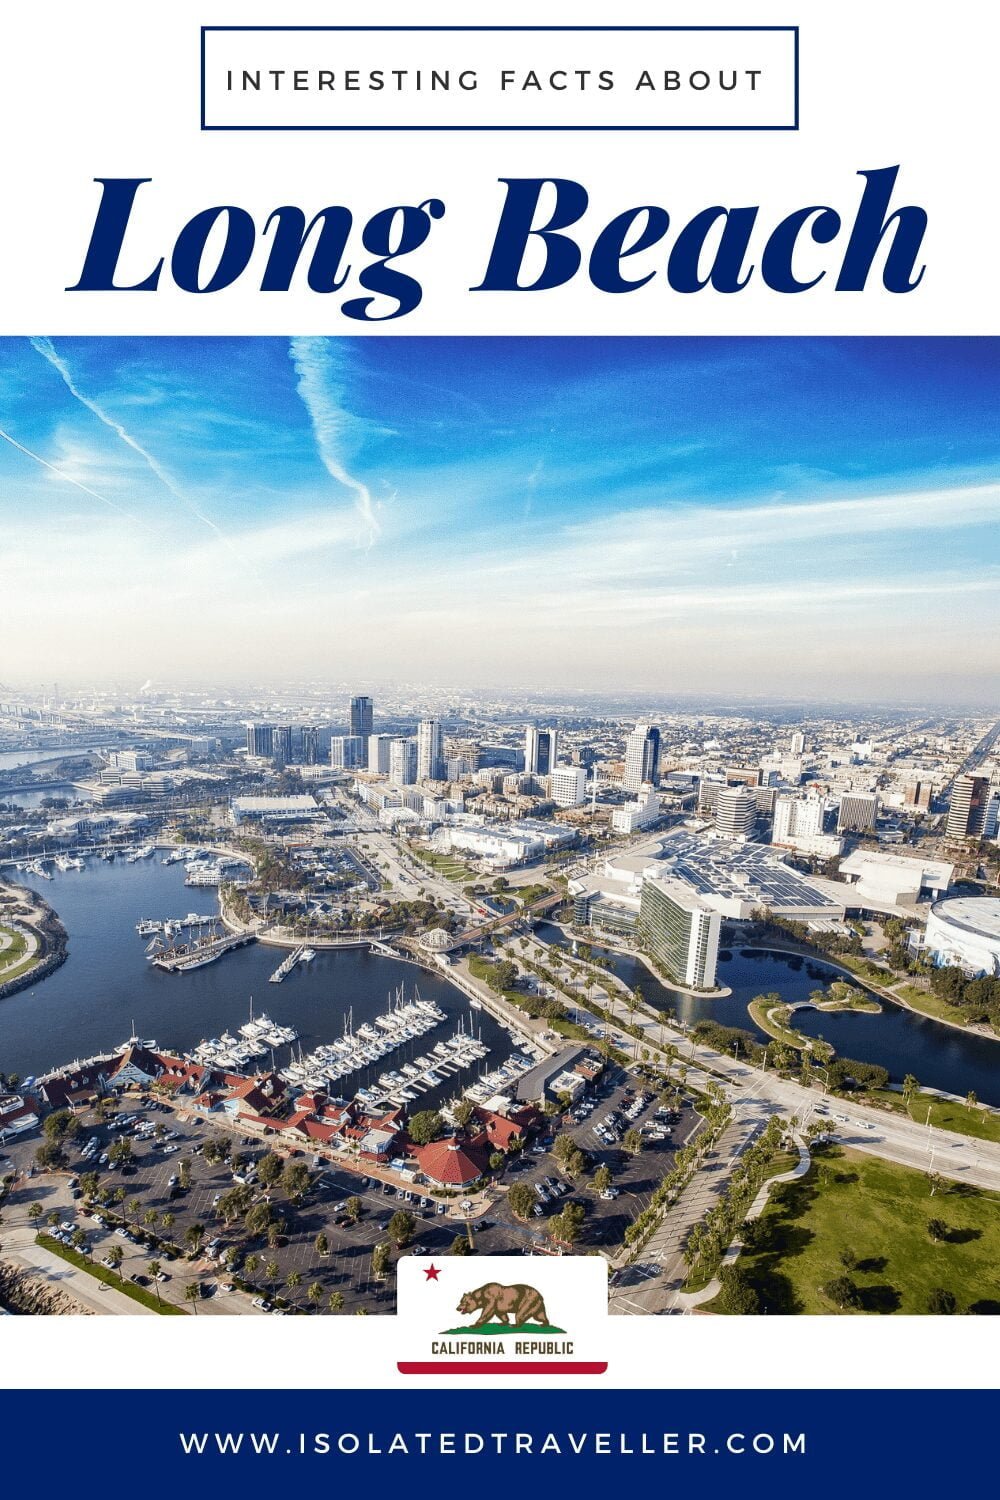 Facts About Long Beach